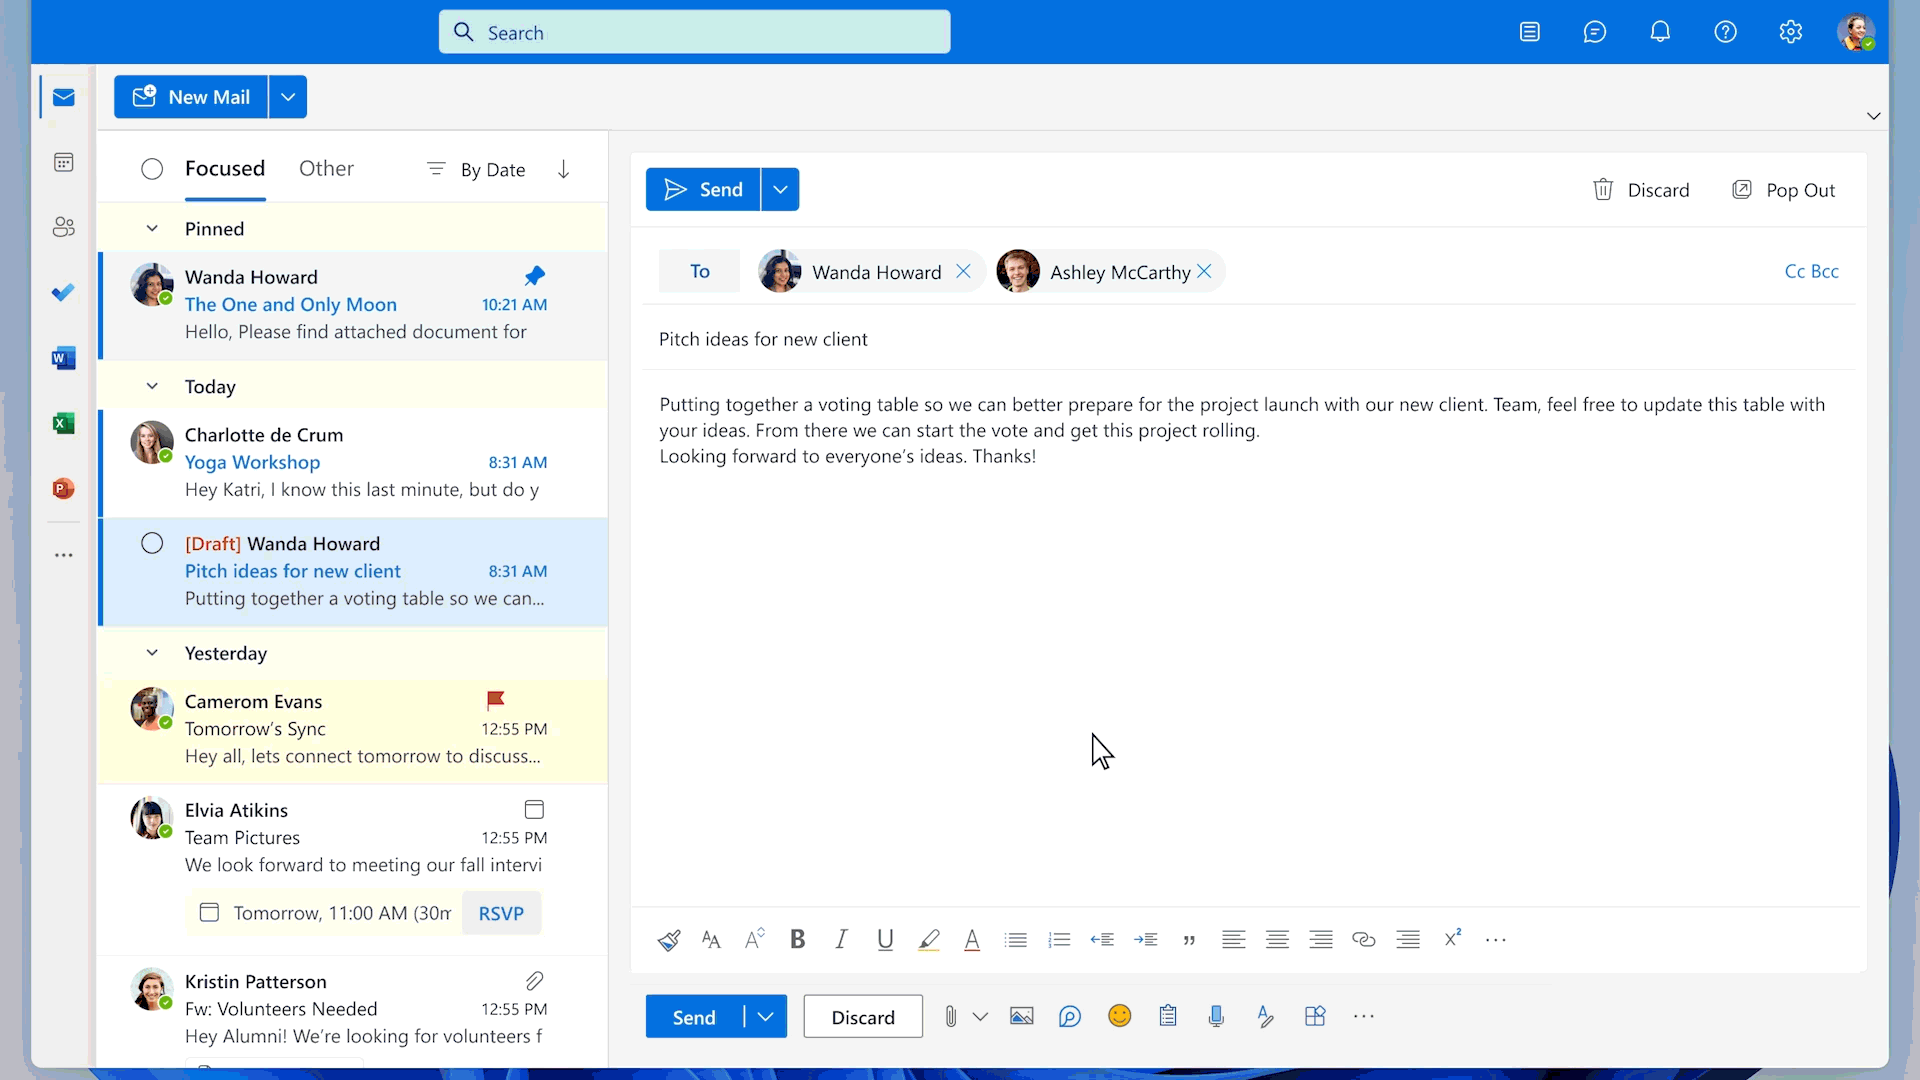 Loop components in Teams chat and Outlook email offer a new way to ideate, create, and make decisions together. 